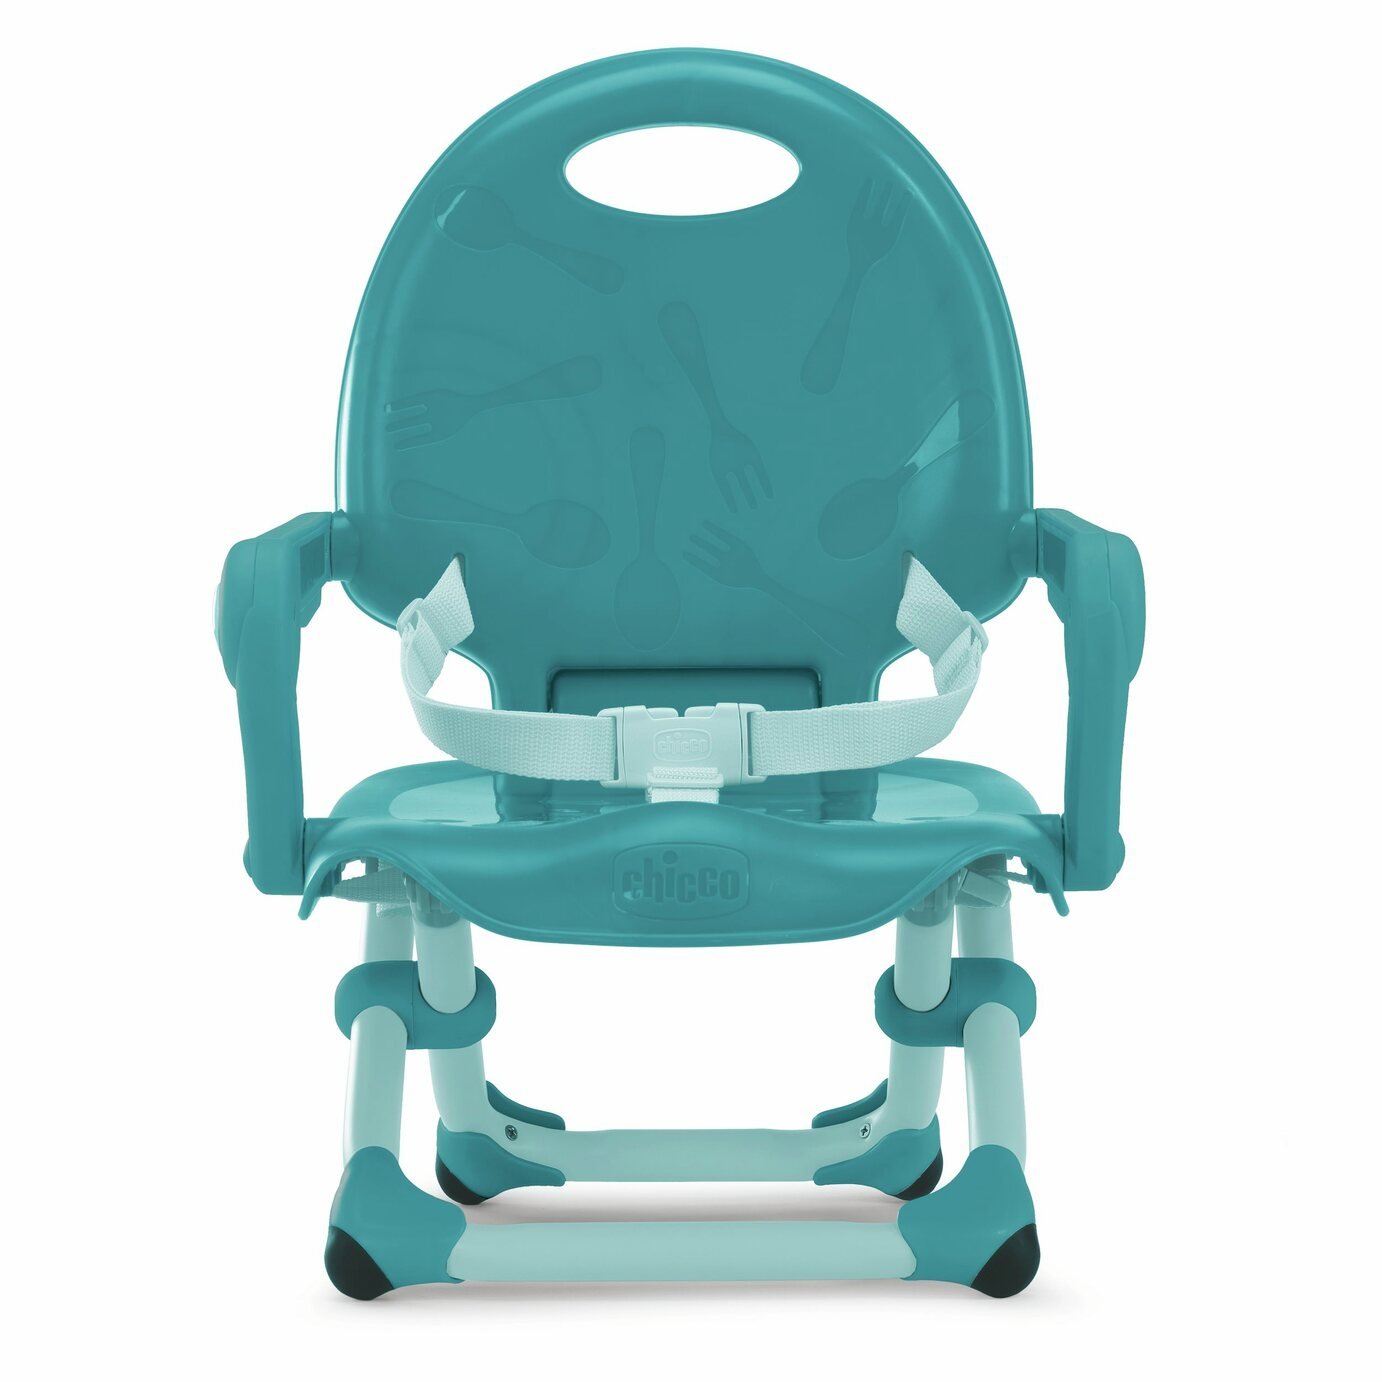 Chicco Pocket Snack Feeding Booster Seat Review